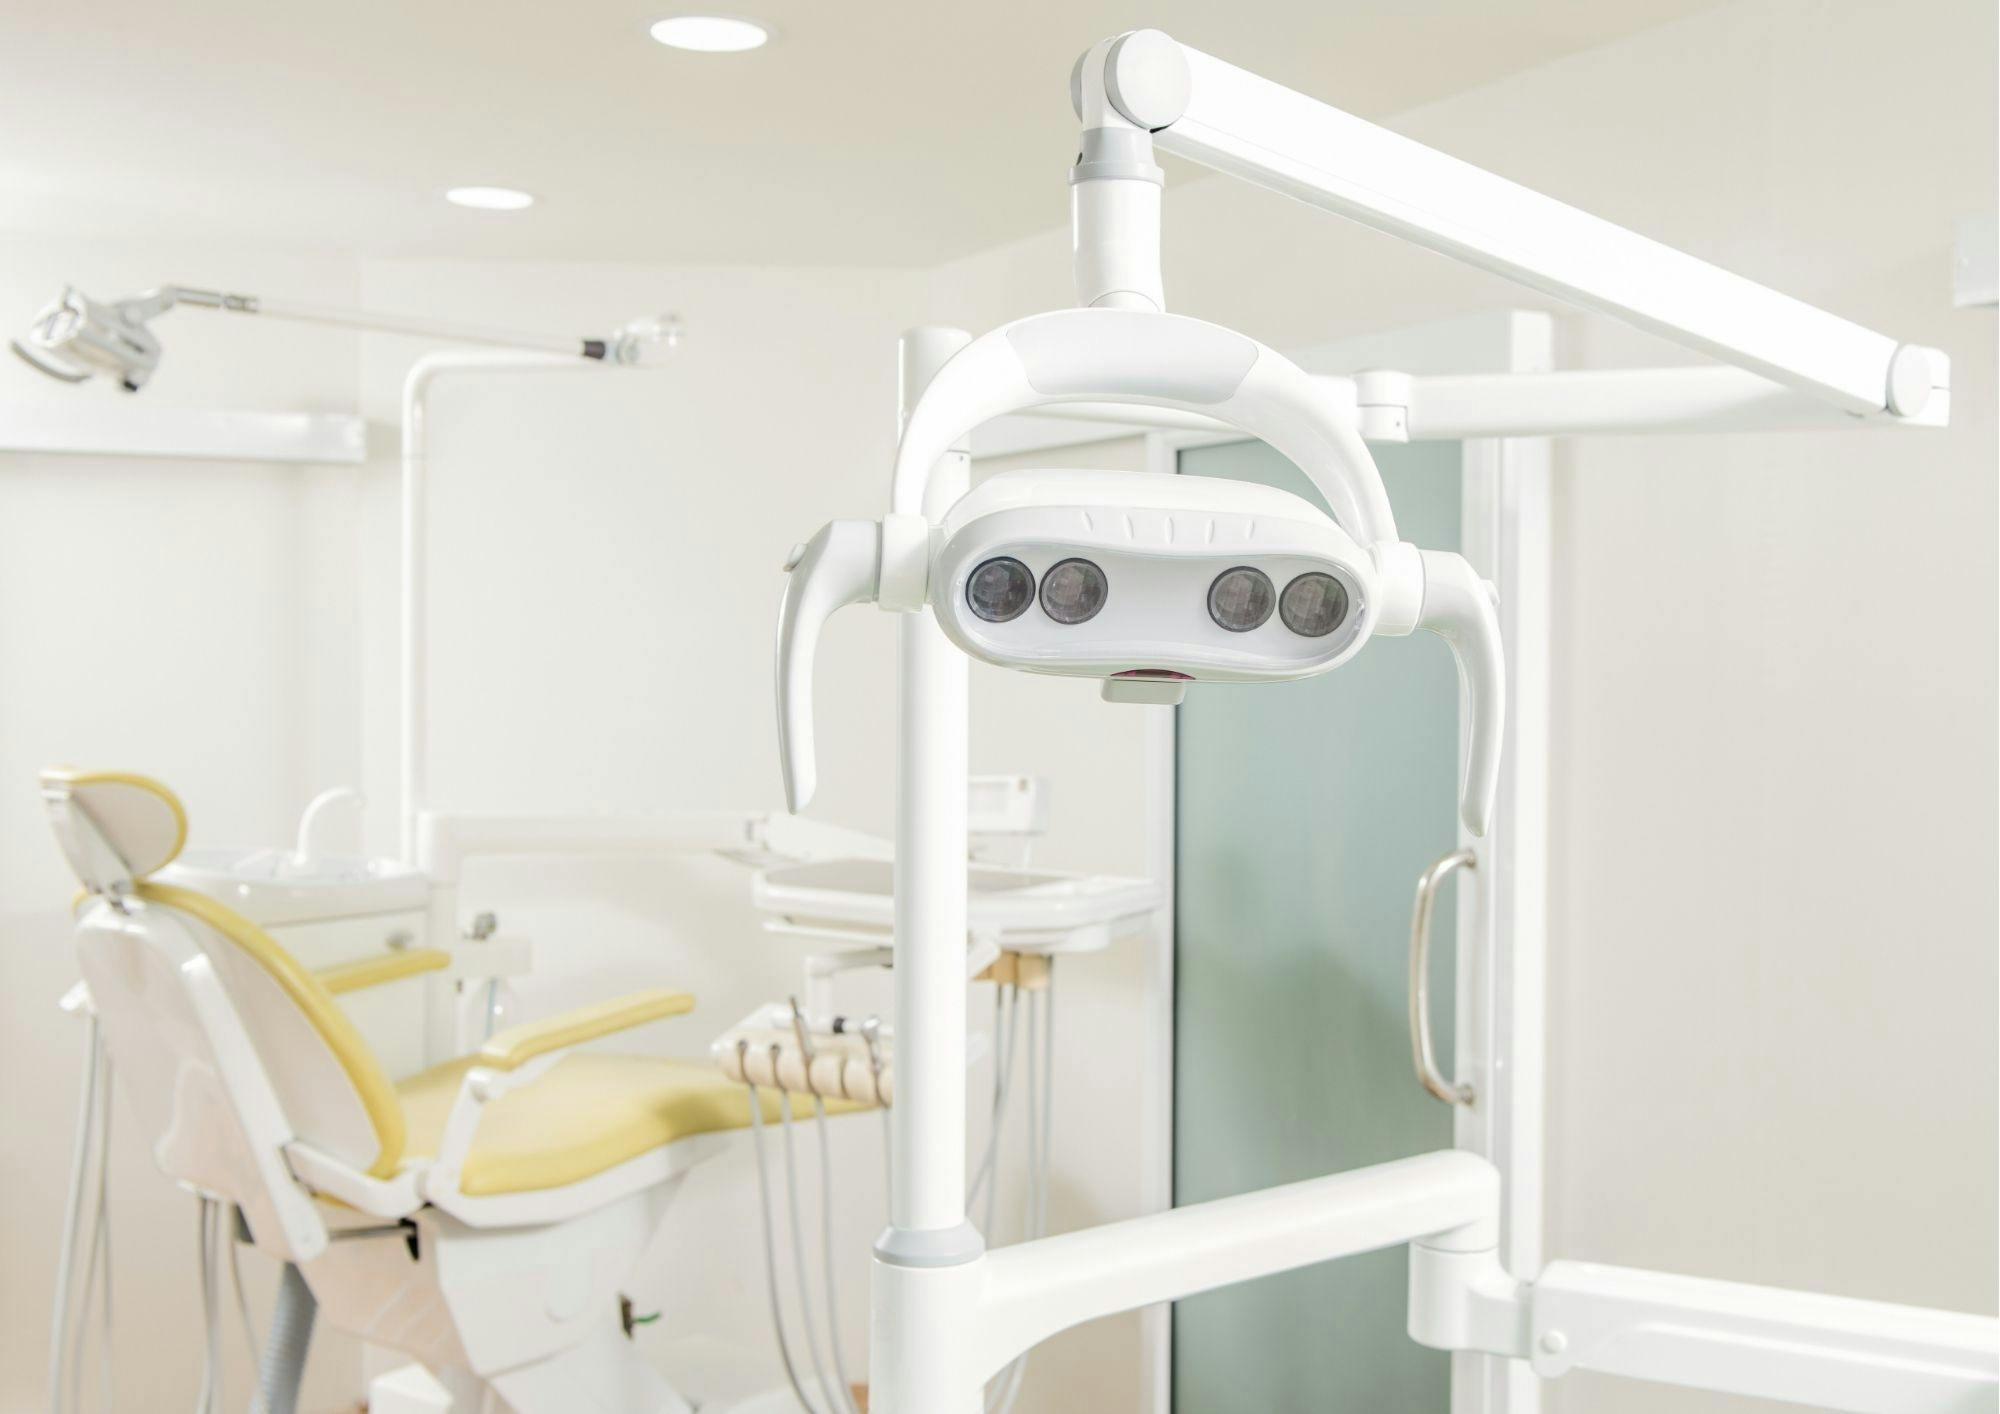 Stock image of a dental practice